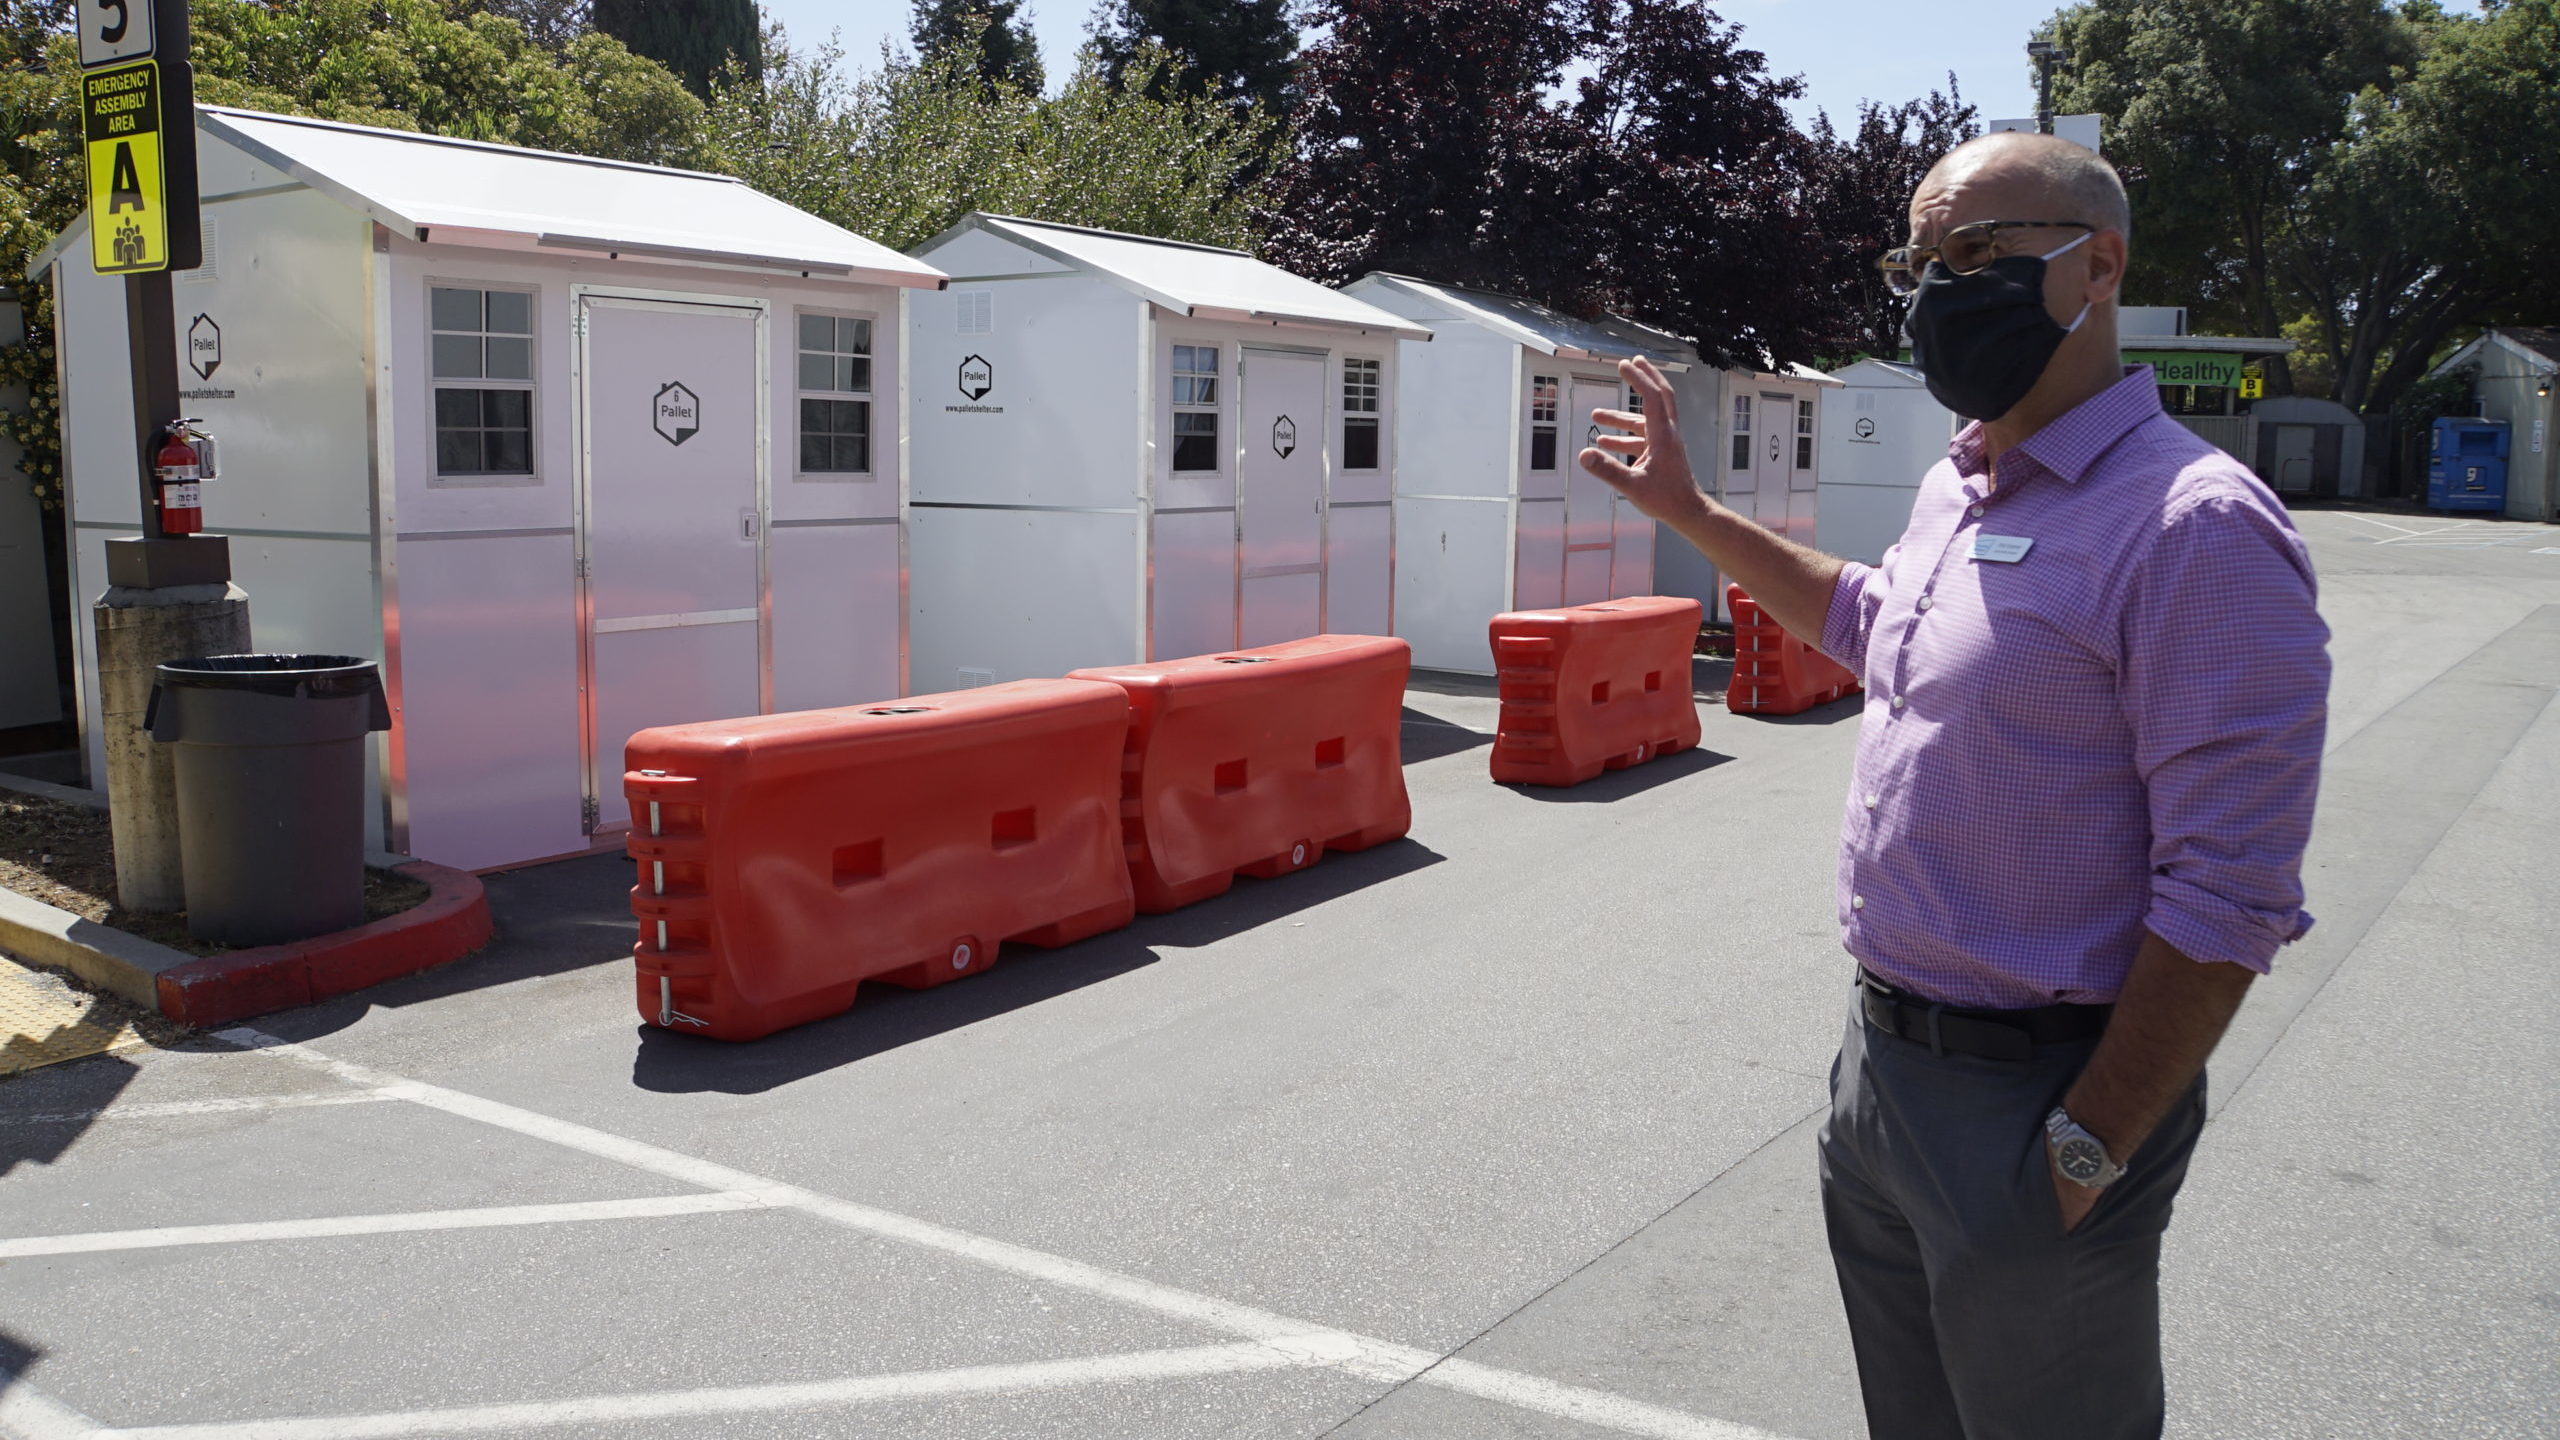 Housing Matters CEO Phil Kramer gives a tour of Pallet Shelters in May 2020.